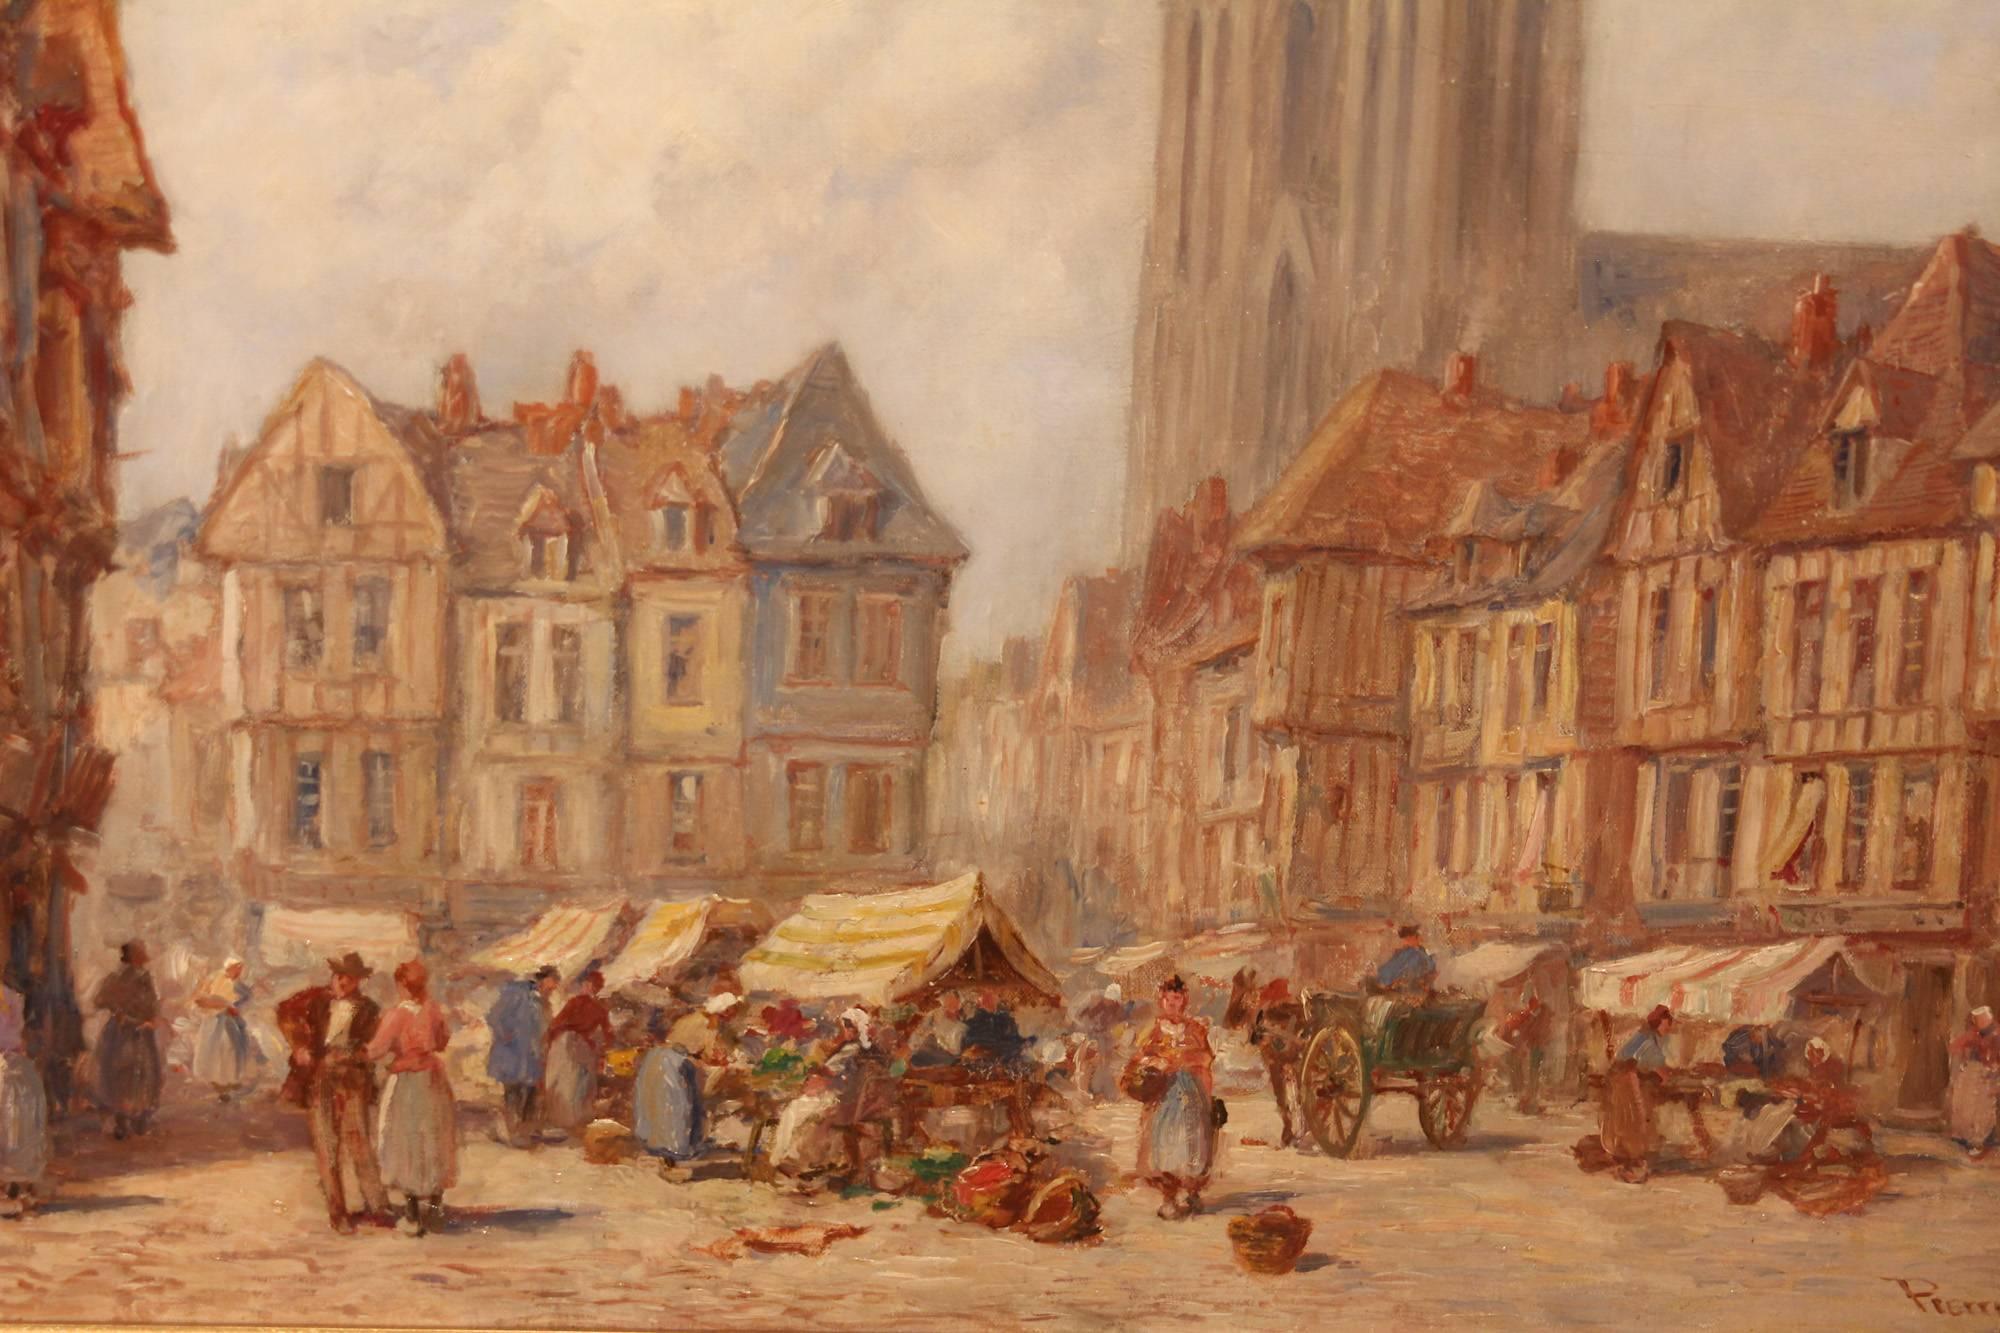 "Quimper, Brittany" oil painting by Pierre le Boeuf. Pseudonym for Thomas Edward Francis who flourished between 1900 and 1940, painting Normandy and Belgium. Oil on canvas, 20 x 30", signed title inscribed verso.

All of the items